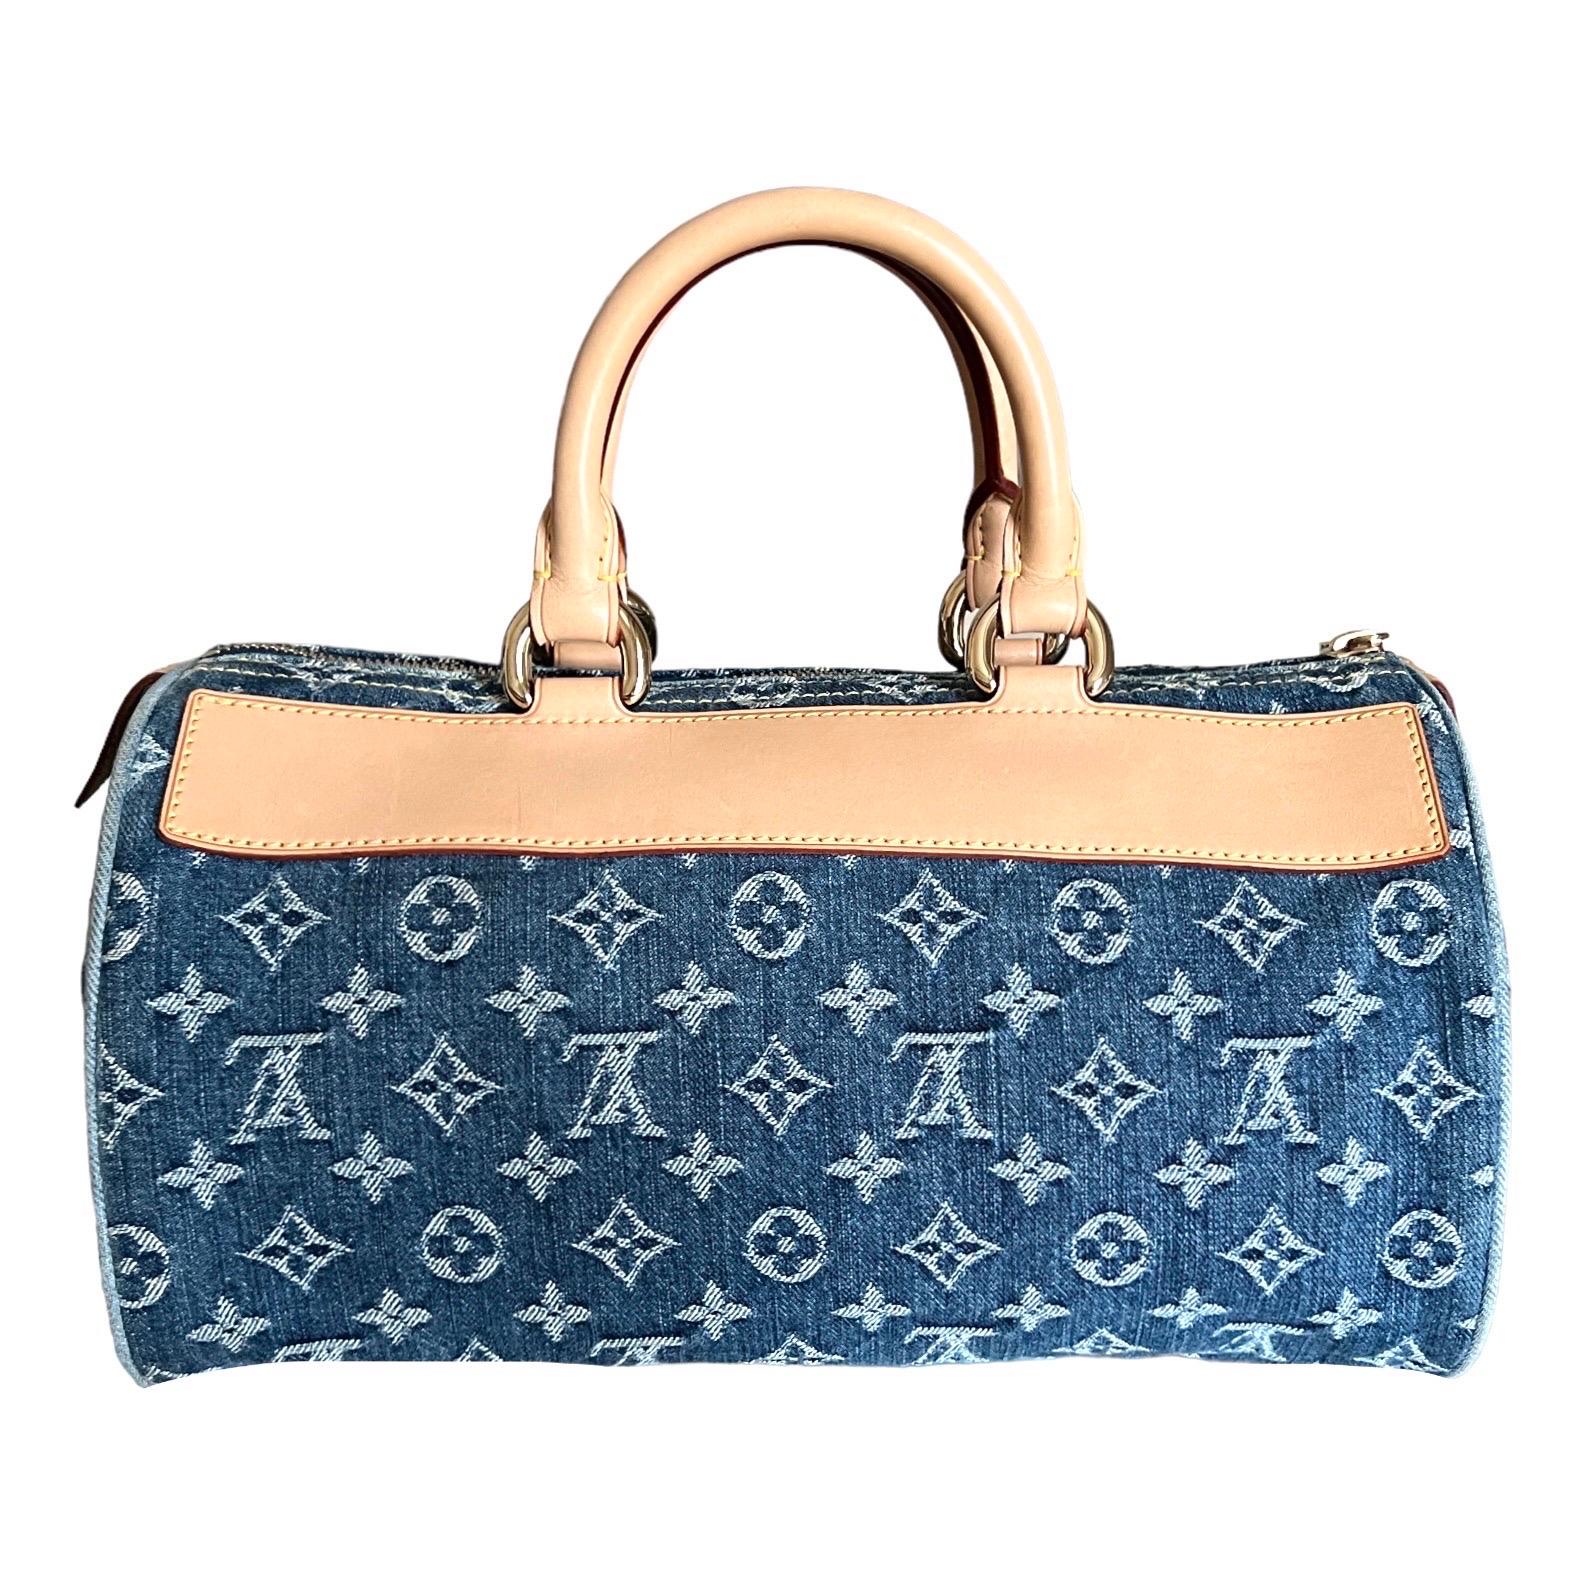 LIMITED EDITION - A rare gem by Louis Vuitton designed by Marc Jacobs
Indigo blue distressed denim with the famous LV monogram 
Vachetta leather trimmings
Closes on top with zipper
Three front pockets, one inner pocket
Rount top handles
Gold-tone